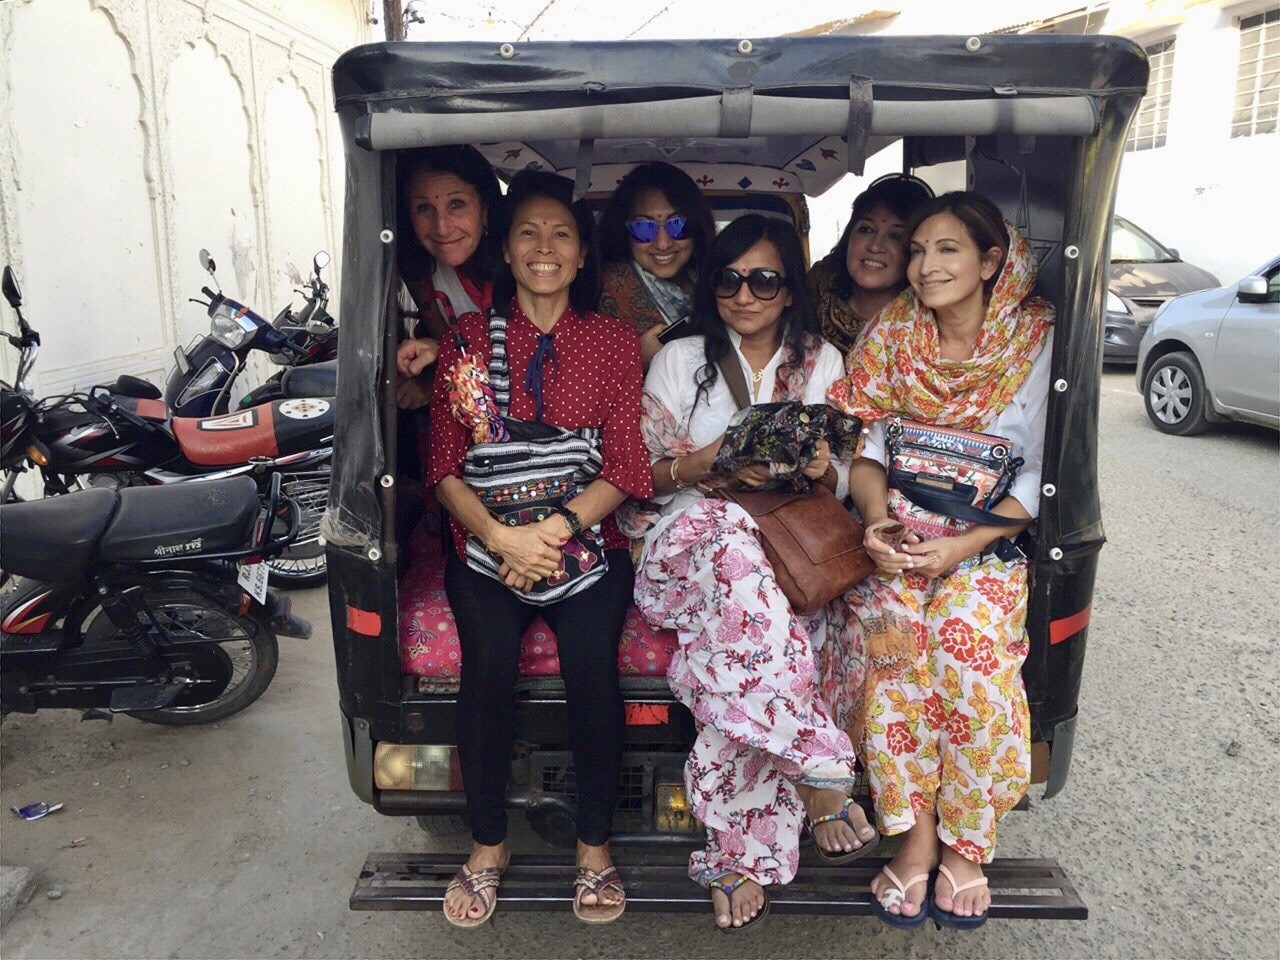 Tourists pile into an auto rickshaw in India during a women-only tour, organised by Tours n Detours. Photo: courtesy of Tours n Detours